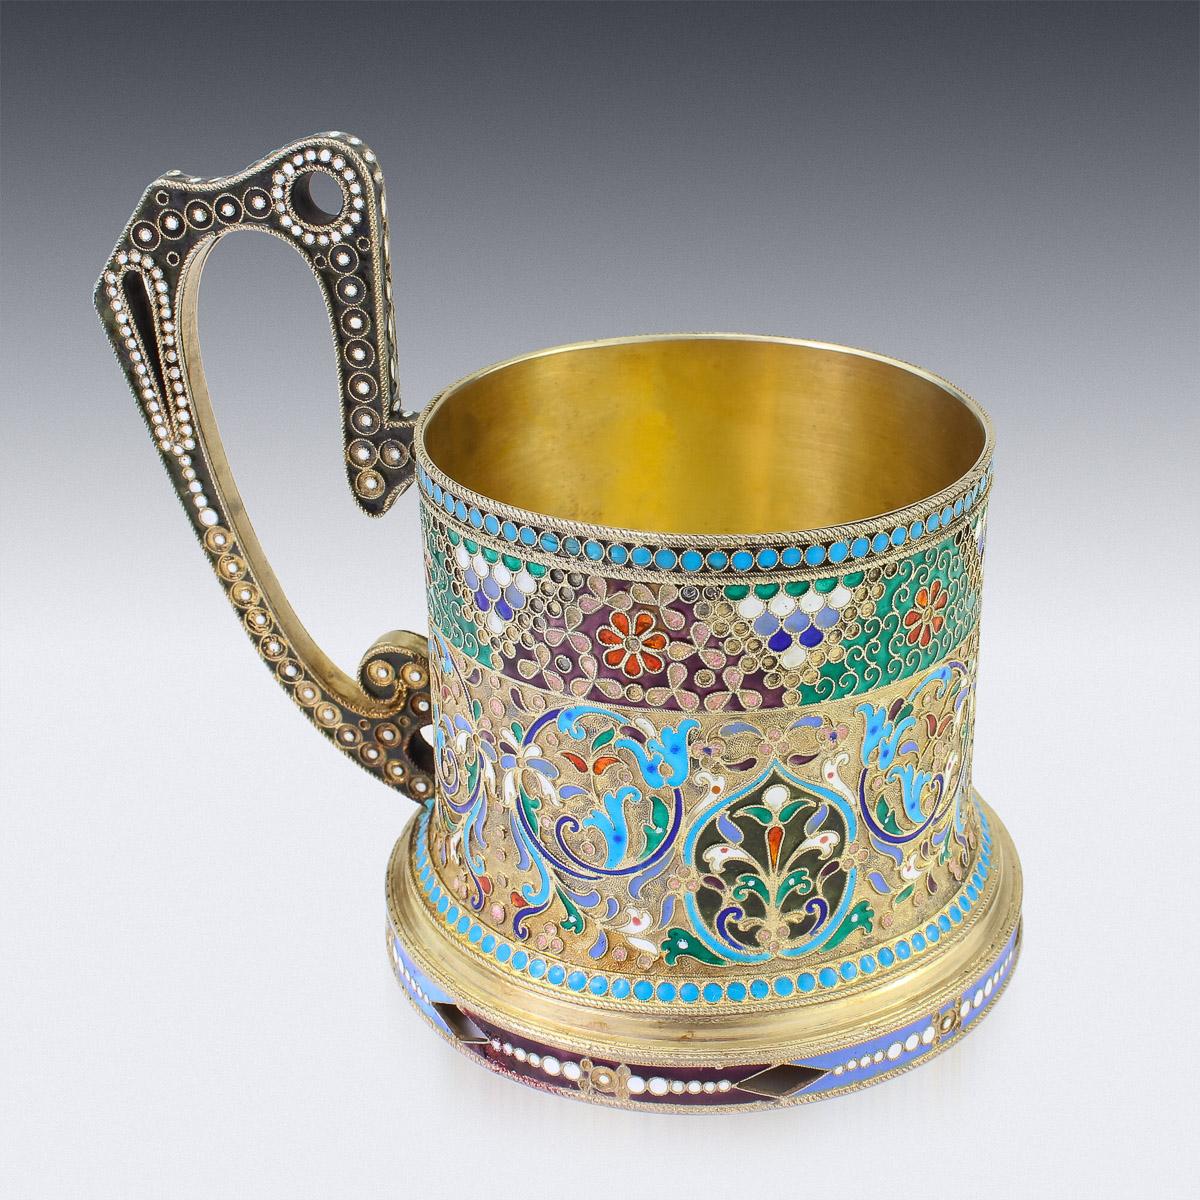 Antique 20th century Imperial Russian solid silver-gilt & cloisonne enamel tea glass holder, circular with upright scroll handle, plain top rim and spreading foot, body profusely decorated with floral scrolls in vary-coloured cloisonné enamel within